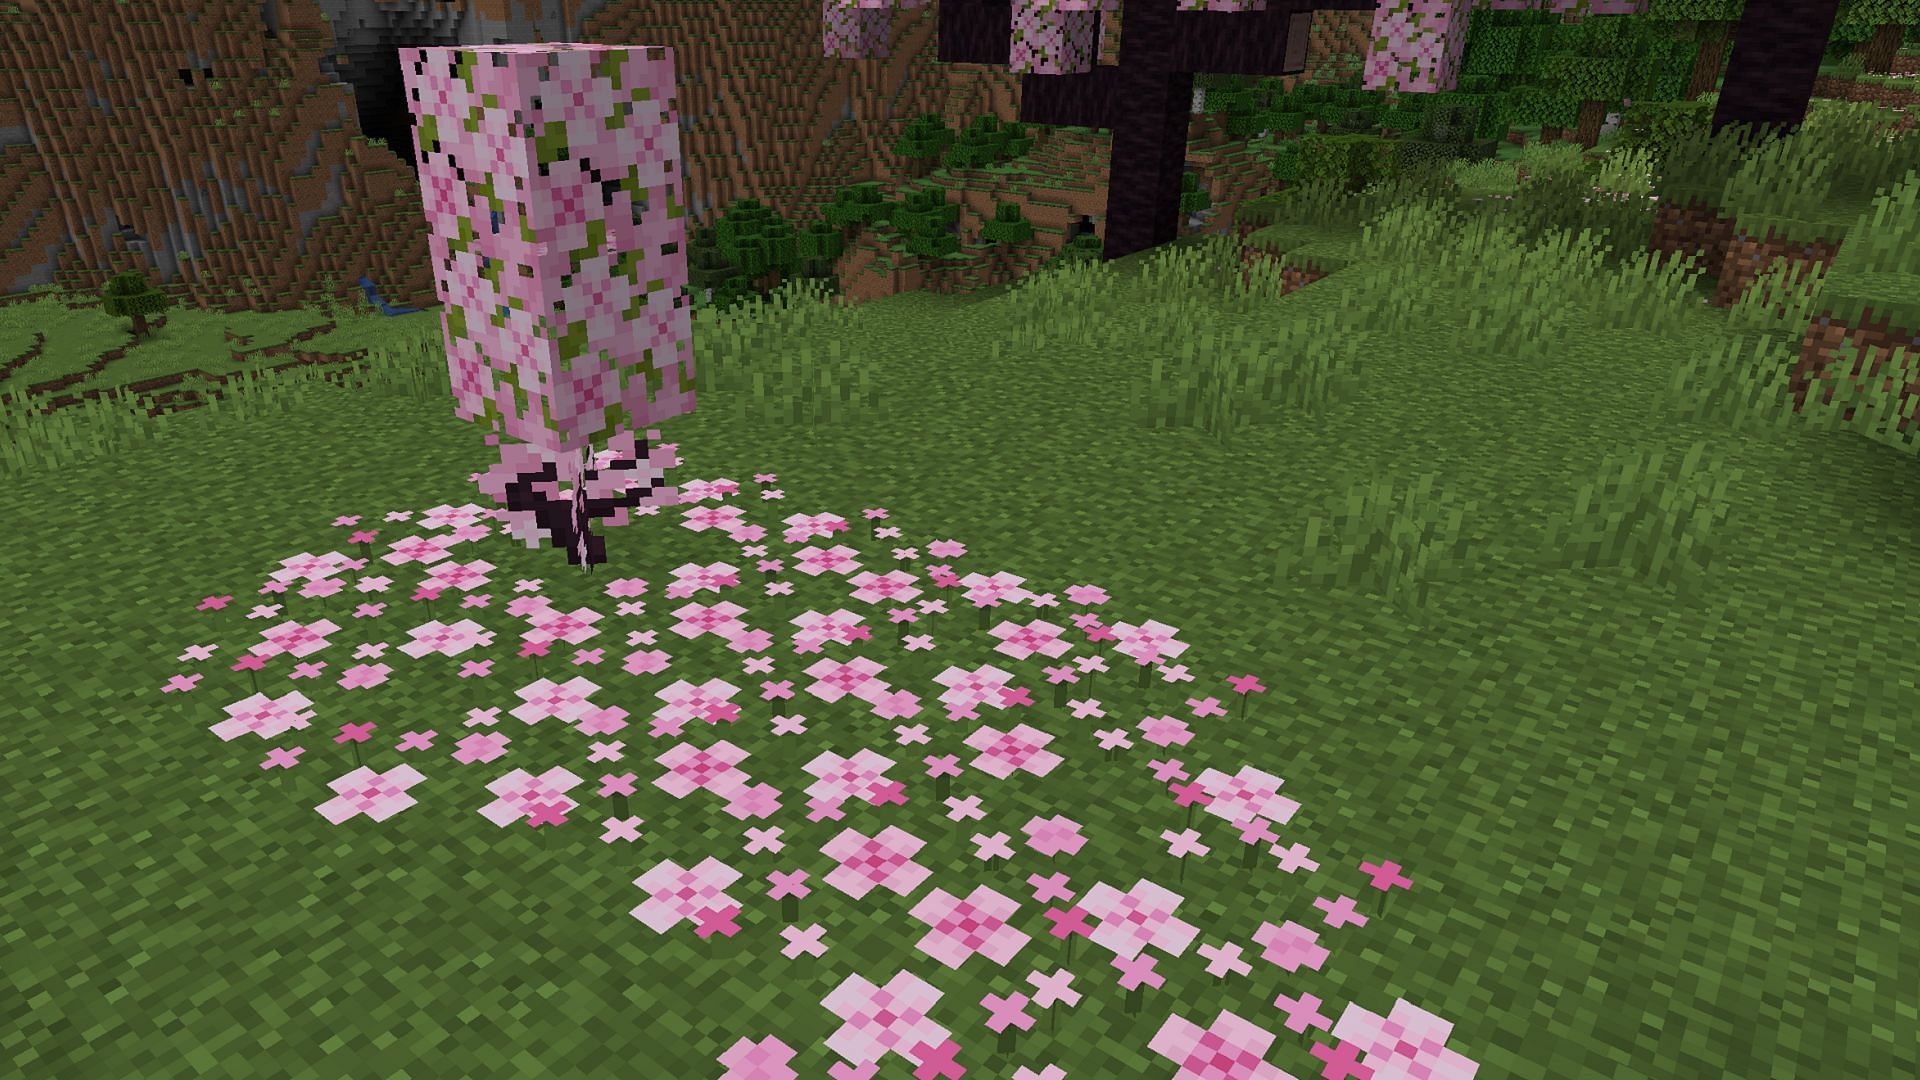 Minecraft 1.20 introduces cherry grove biomes complete with pink petals on the forest floor (Image via u/Pooptopiaproblems/Reddit)